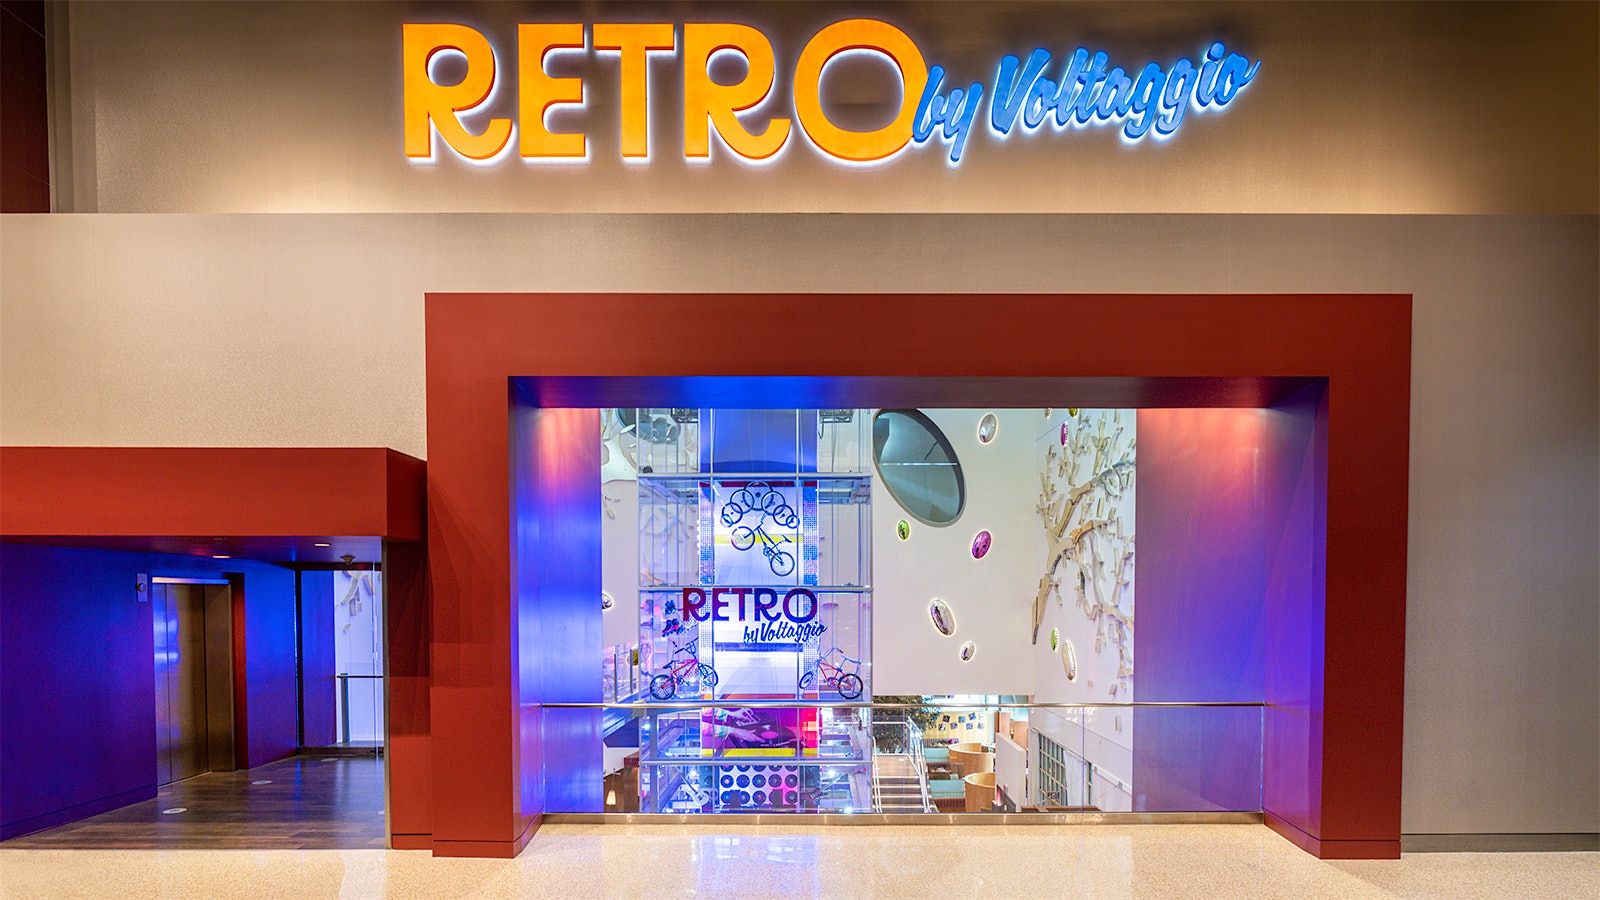  The entrance to Retro by Voltaggio, with a large, bright neon sign above the door